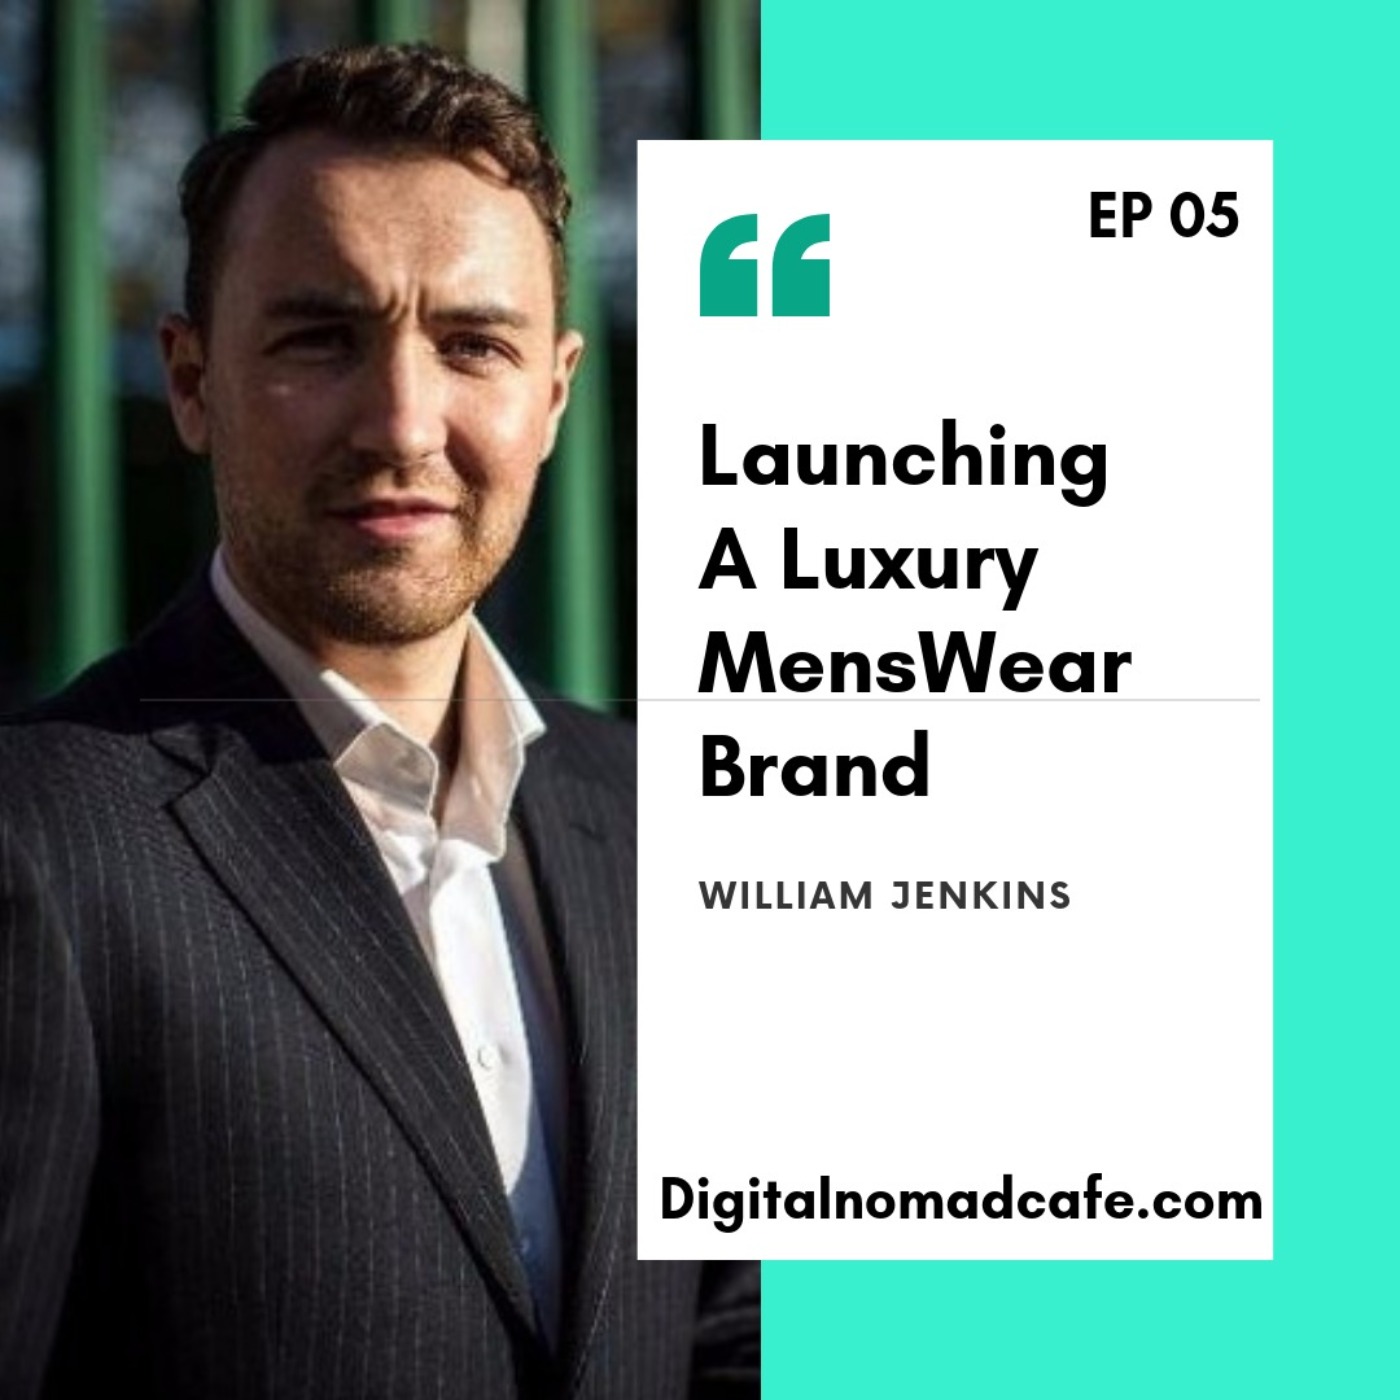 EP05: Launching A Luxury MensWear Brand with William Jenkins from Mr.Jenks.com